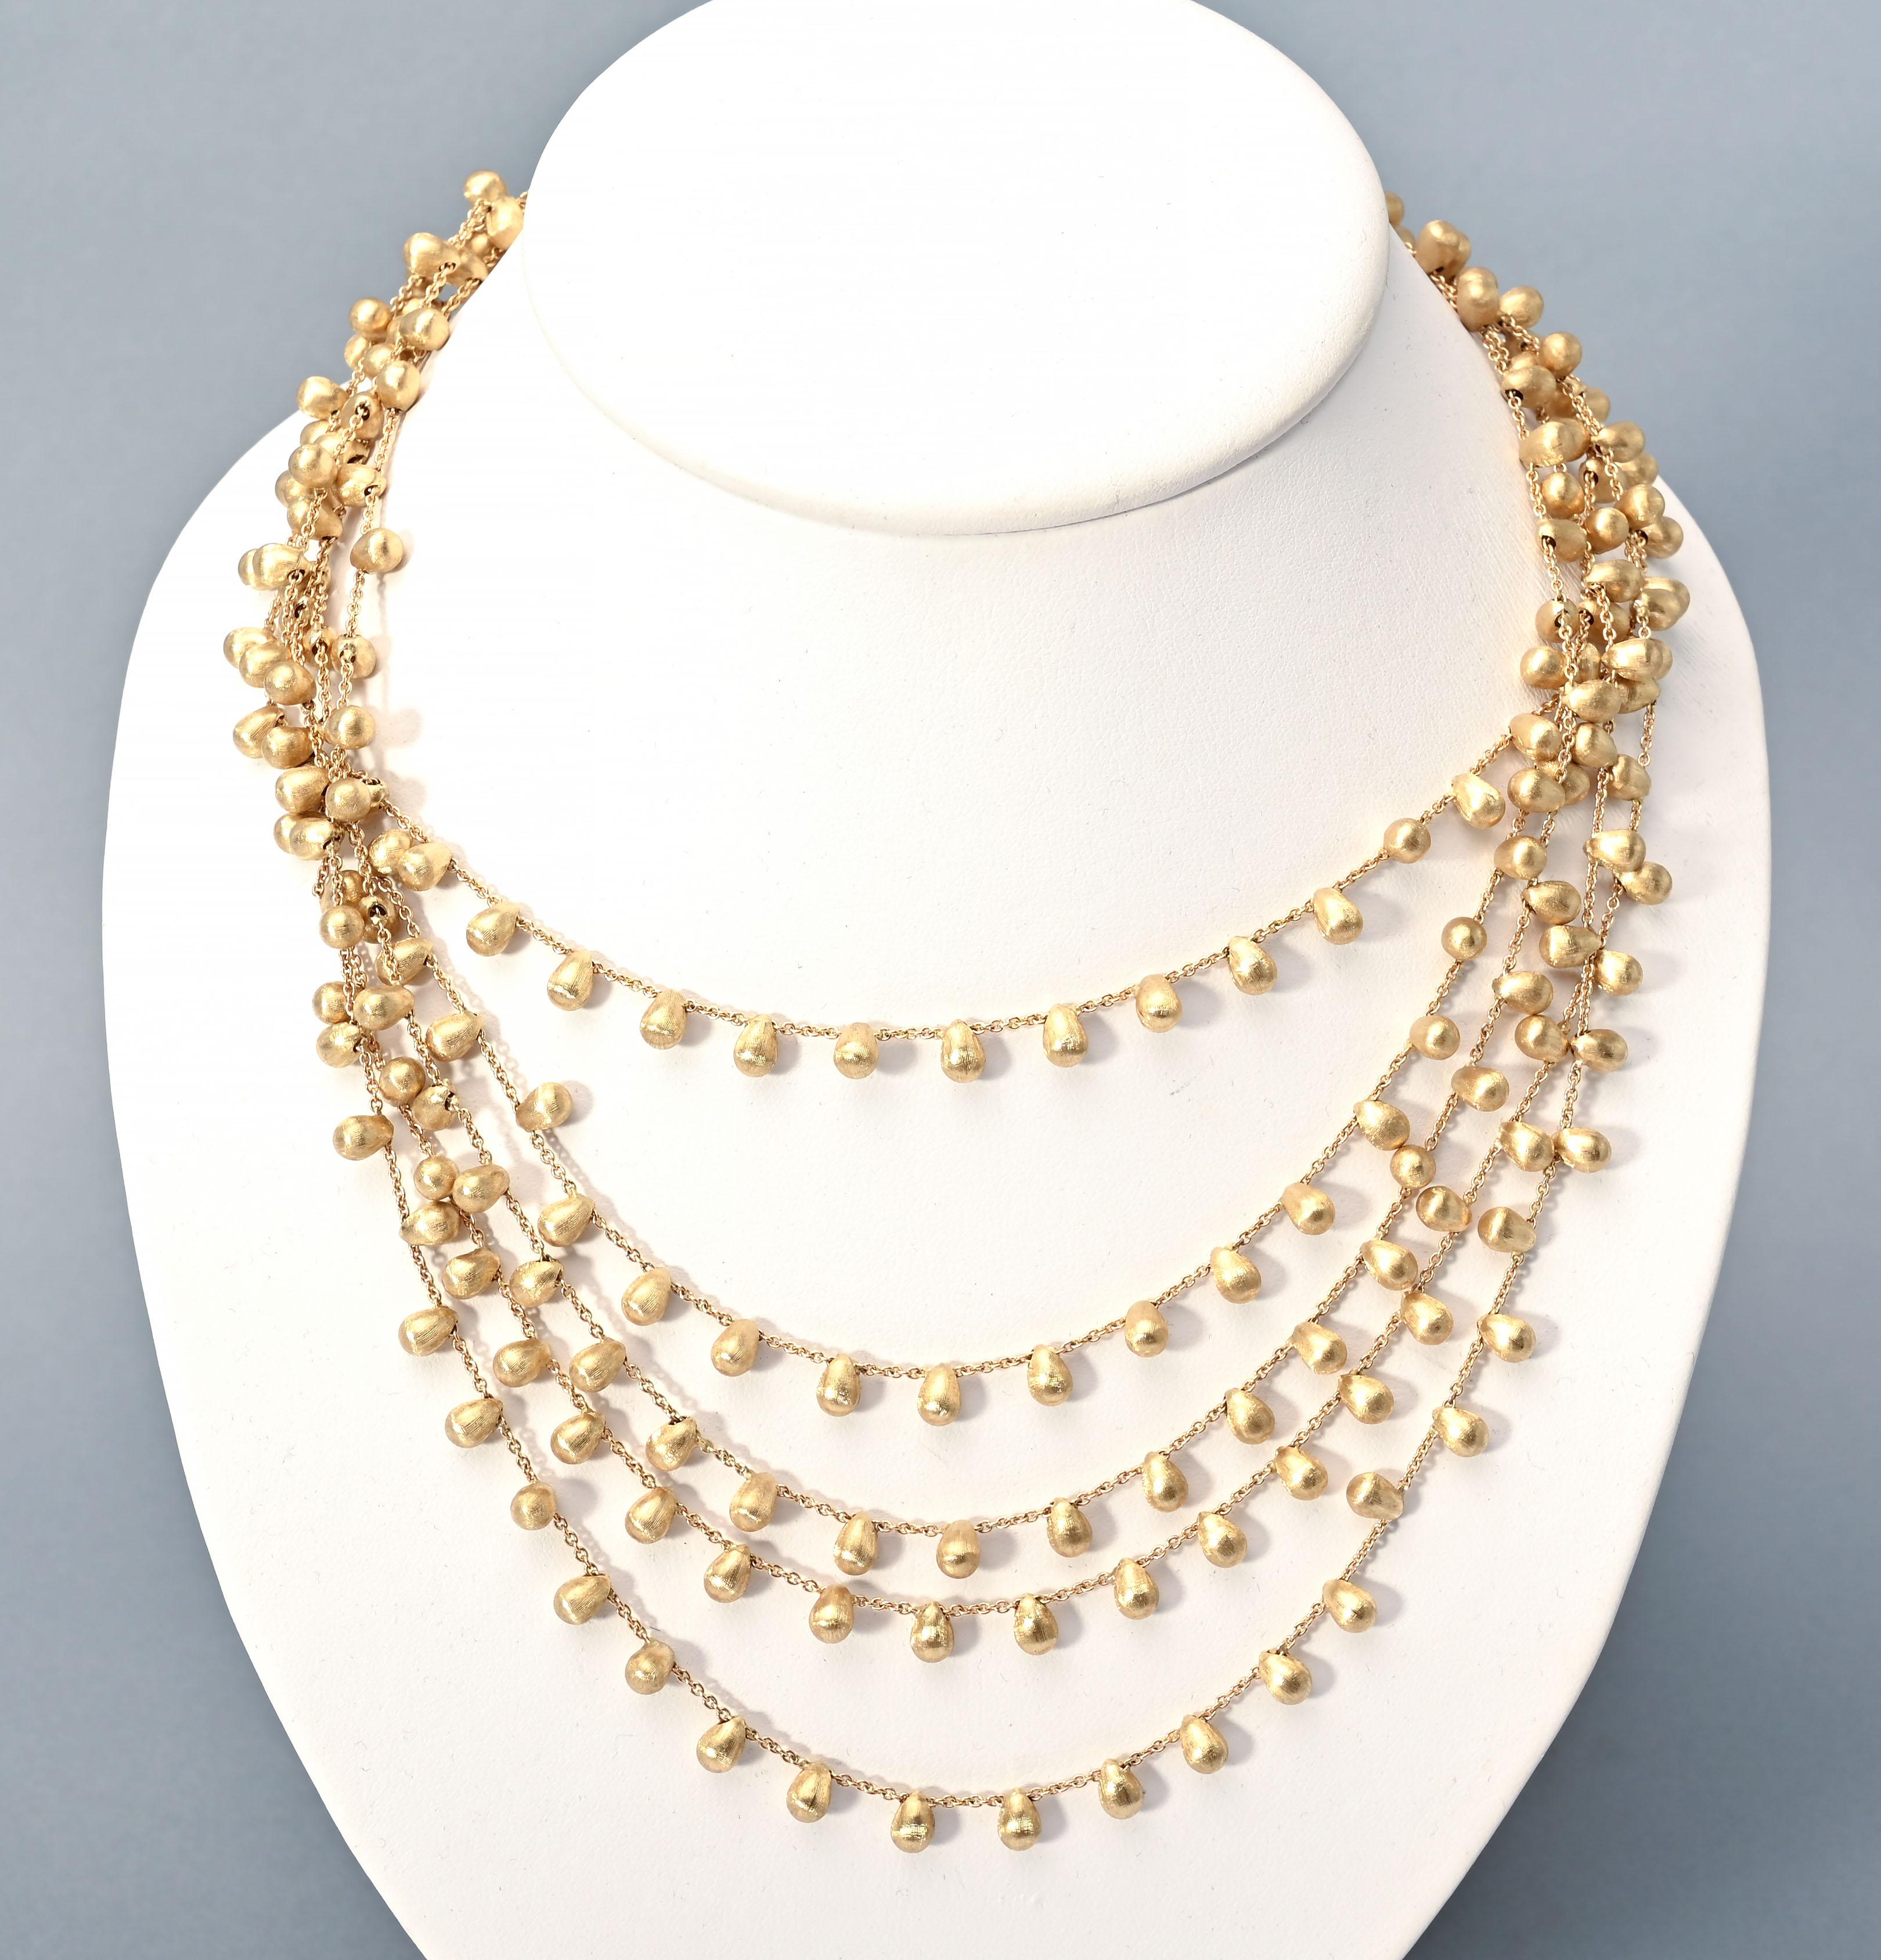 This five strand gold bead necklace is by Marco Bicego, the most popular  of contemporary designers. He  is known for the delicately textured hand etched surfaces he creates to the gold. His pieces are all crafted by hand. This necklace has five